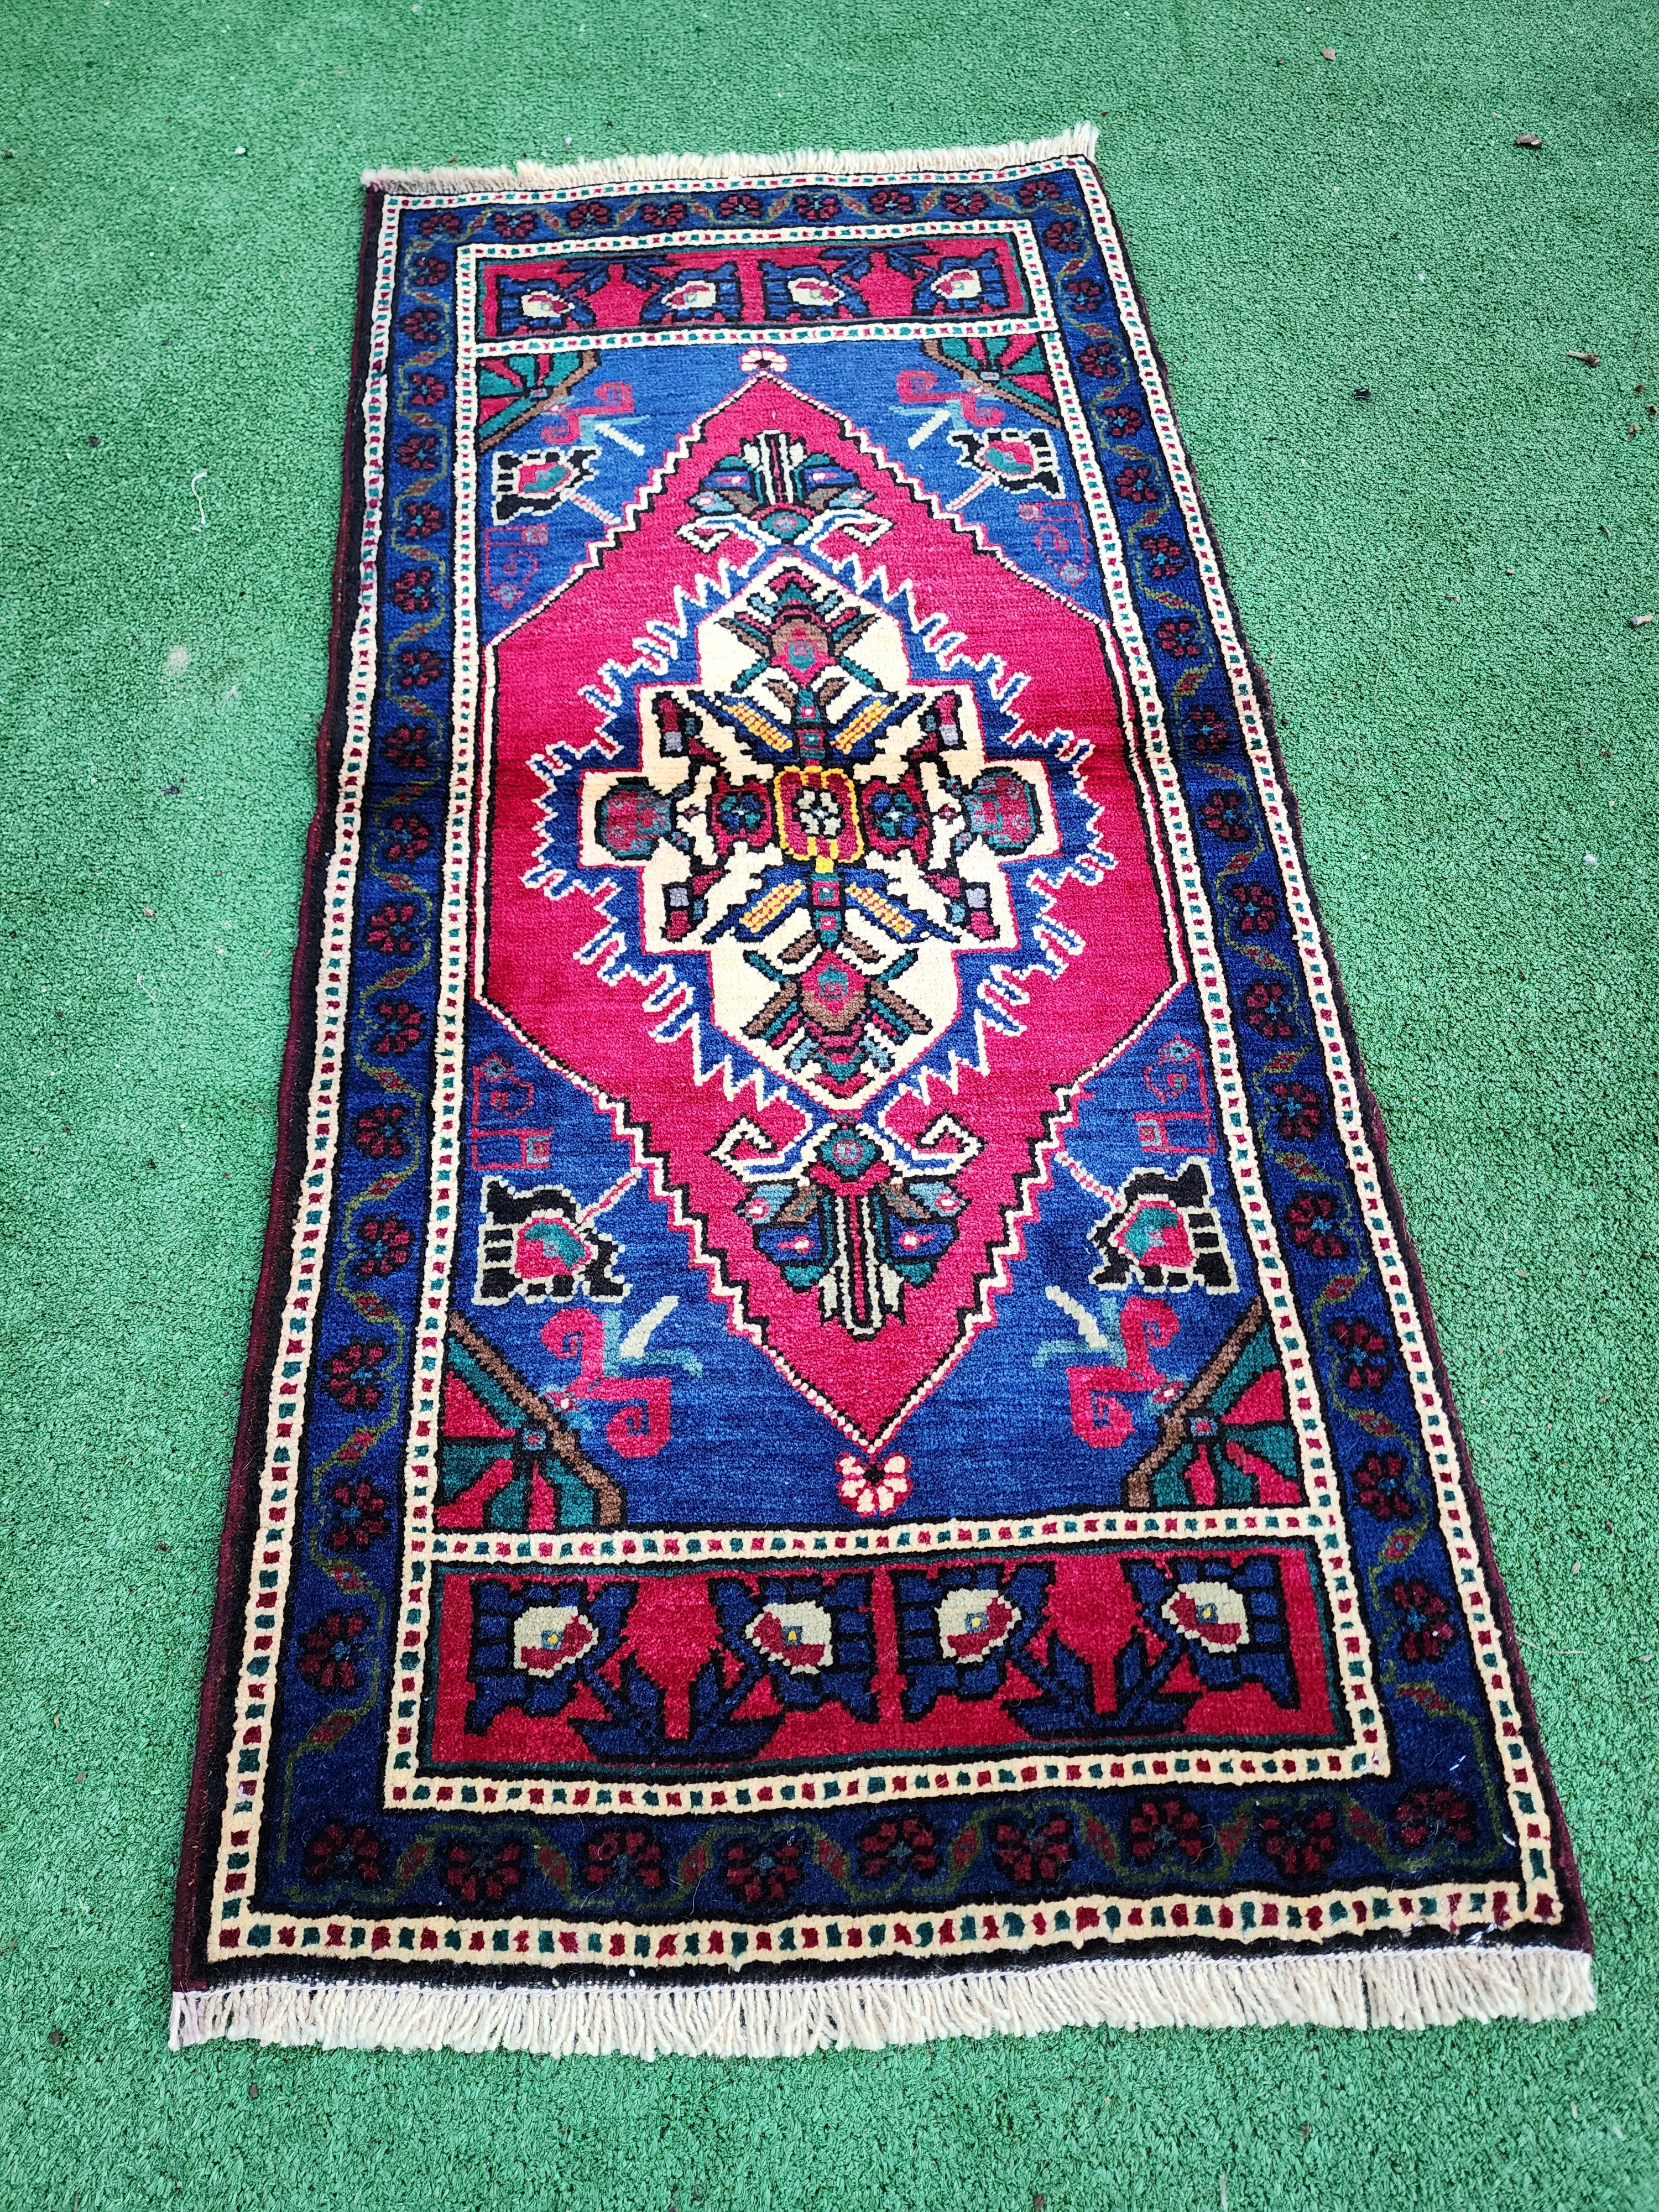 Red and  Blue Small Turkish Rug 3 ft 7 in x 1 ft 7 in  Vintage Rug for Kitchen, Hallway or Bedside Rug